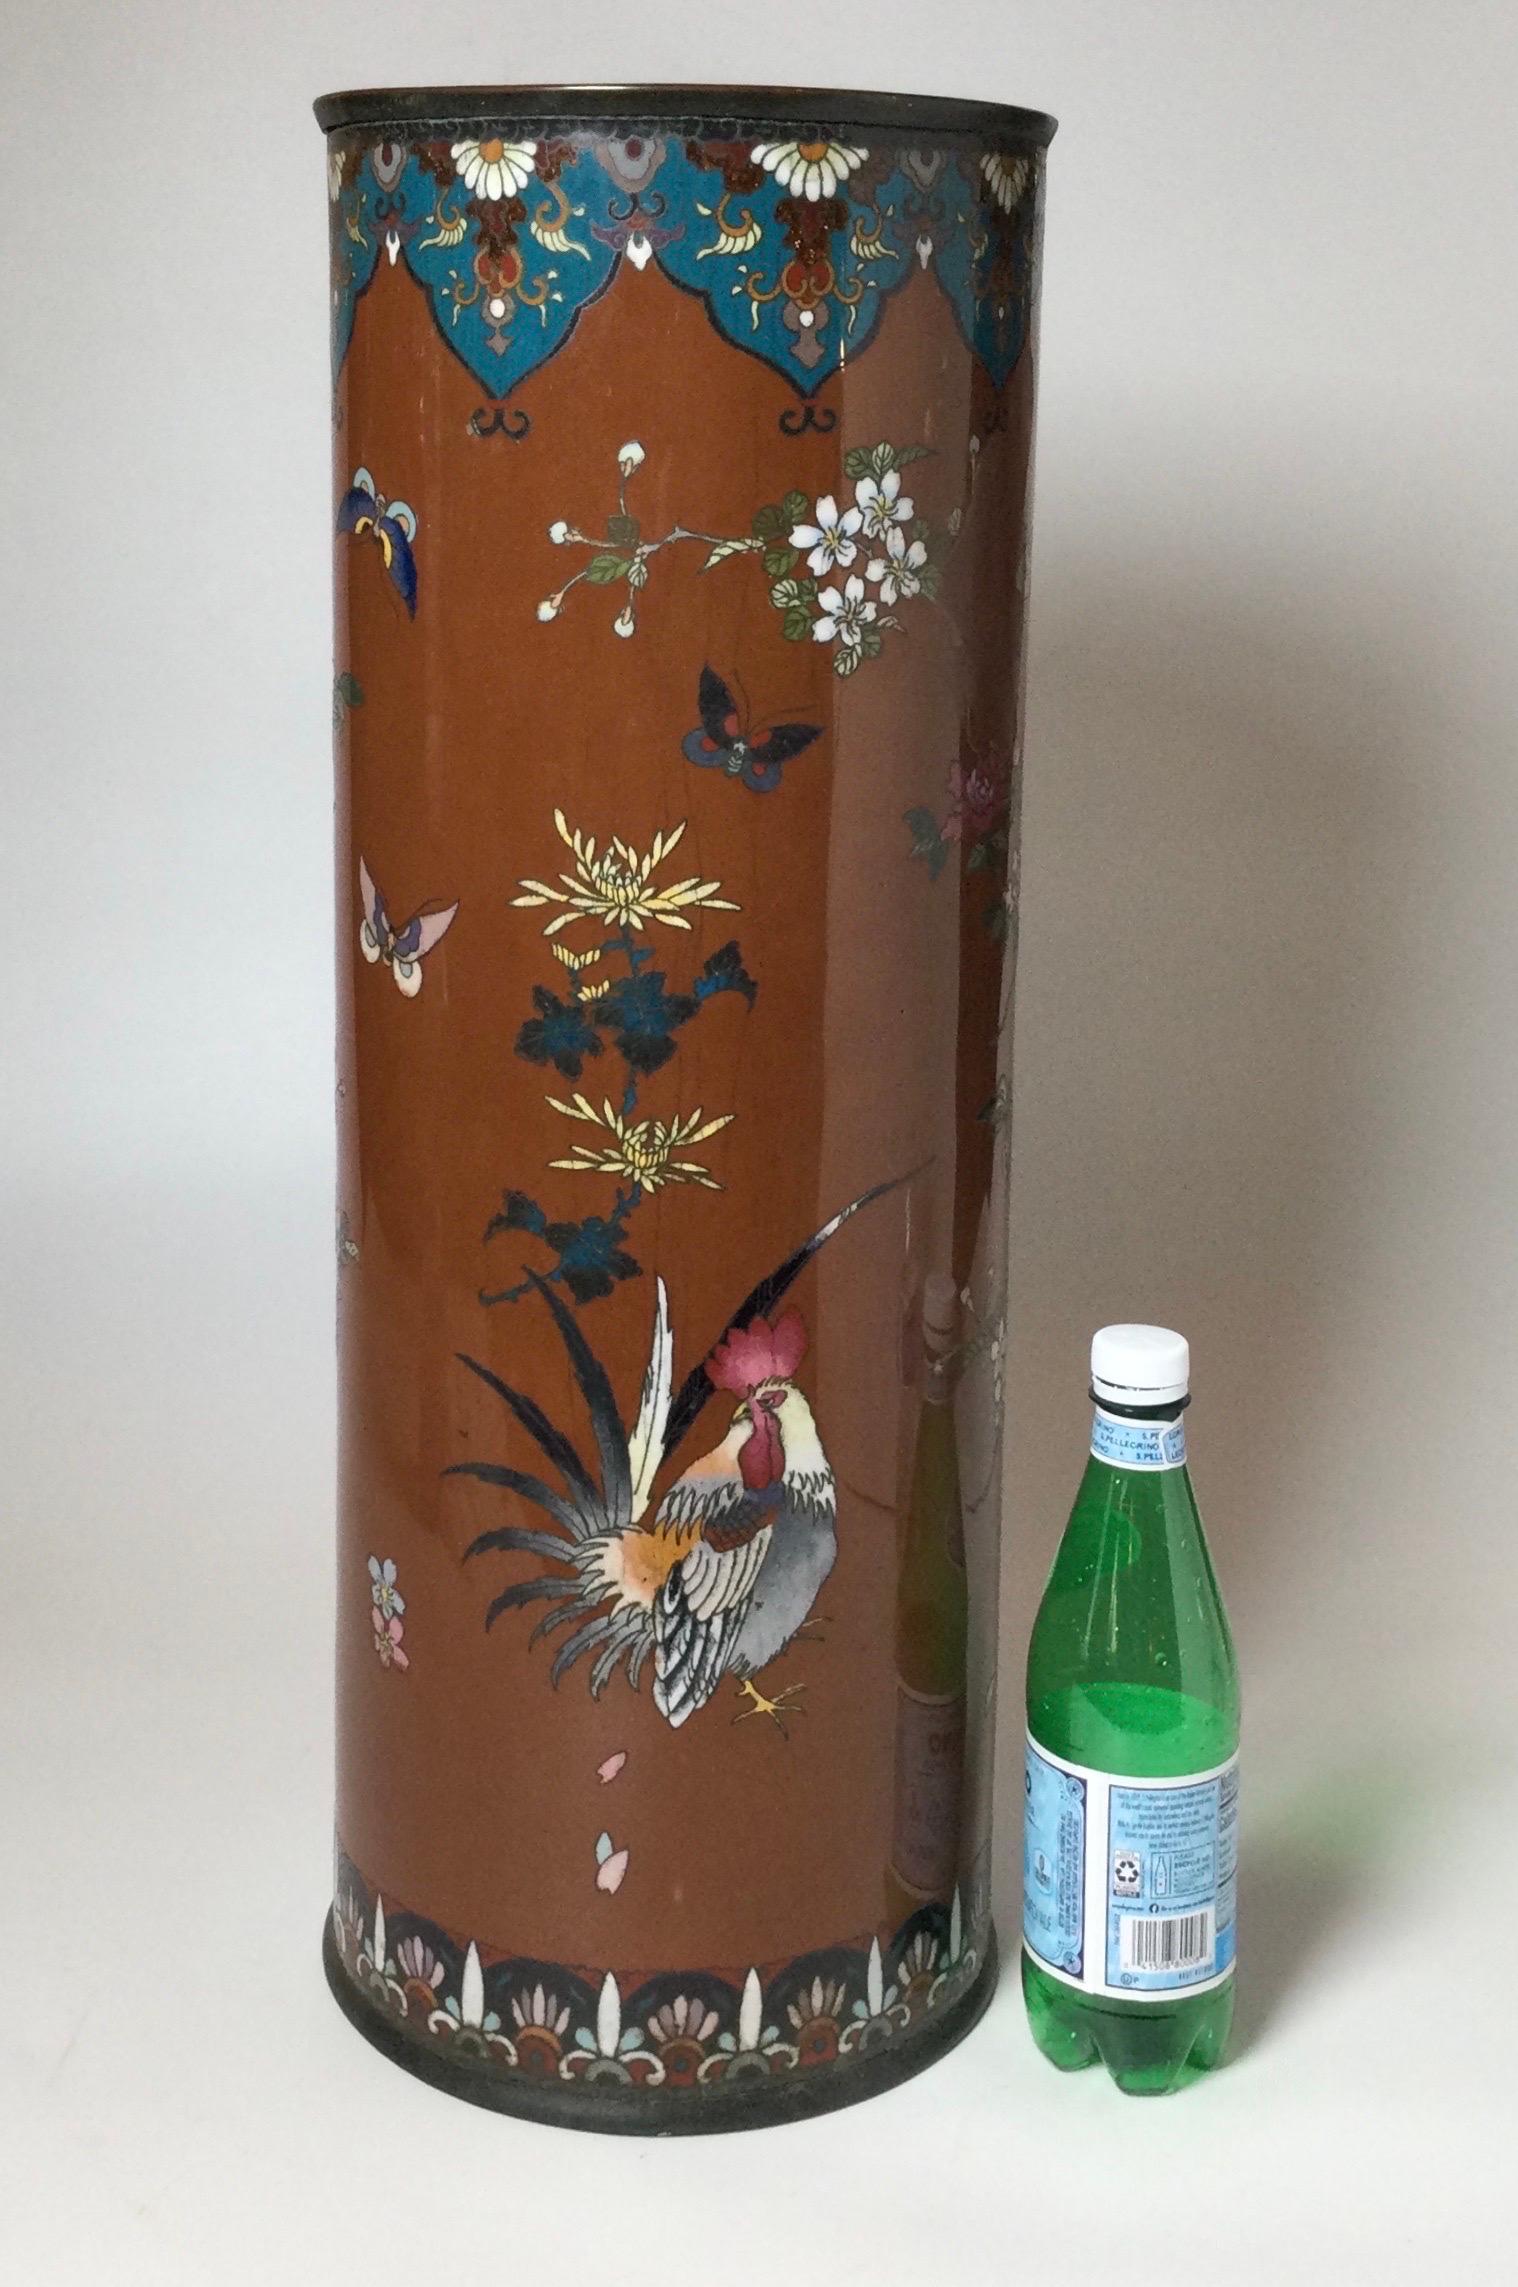 A cylindrical cloisonné can or umbrella holder with multicolor floral bird and butterfly decoration. useful item, beautifully designed. The are some age related stress cracks as shown in pictures with on small repair to the brown background.